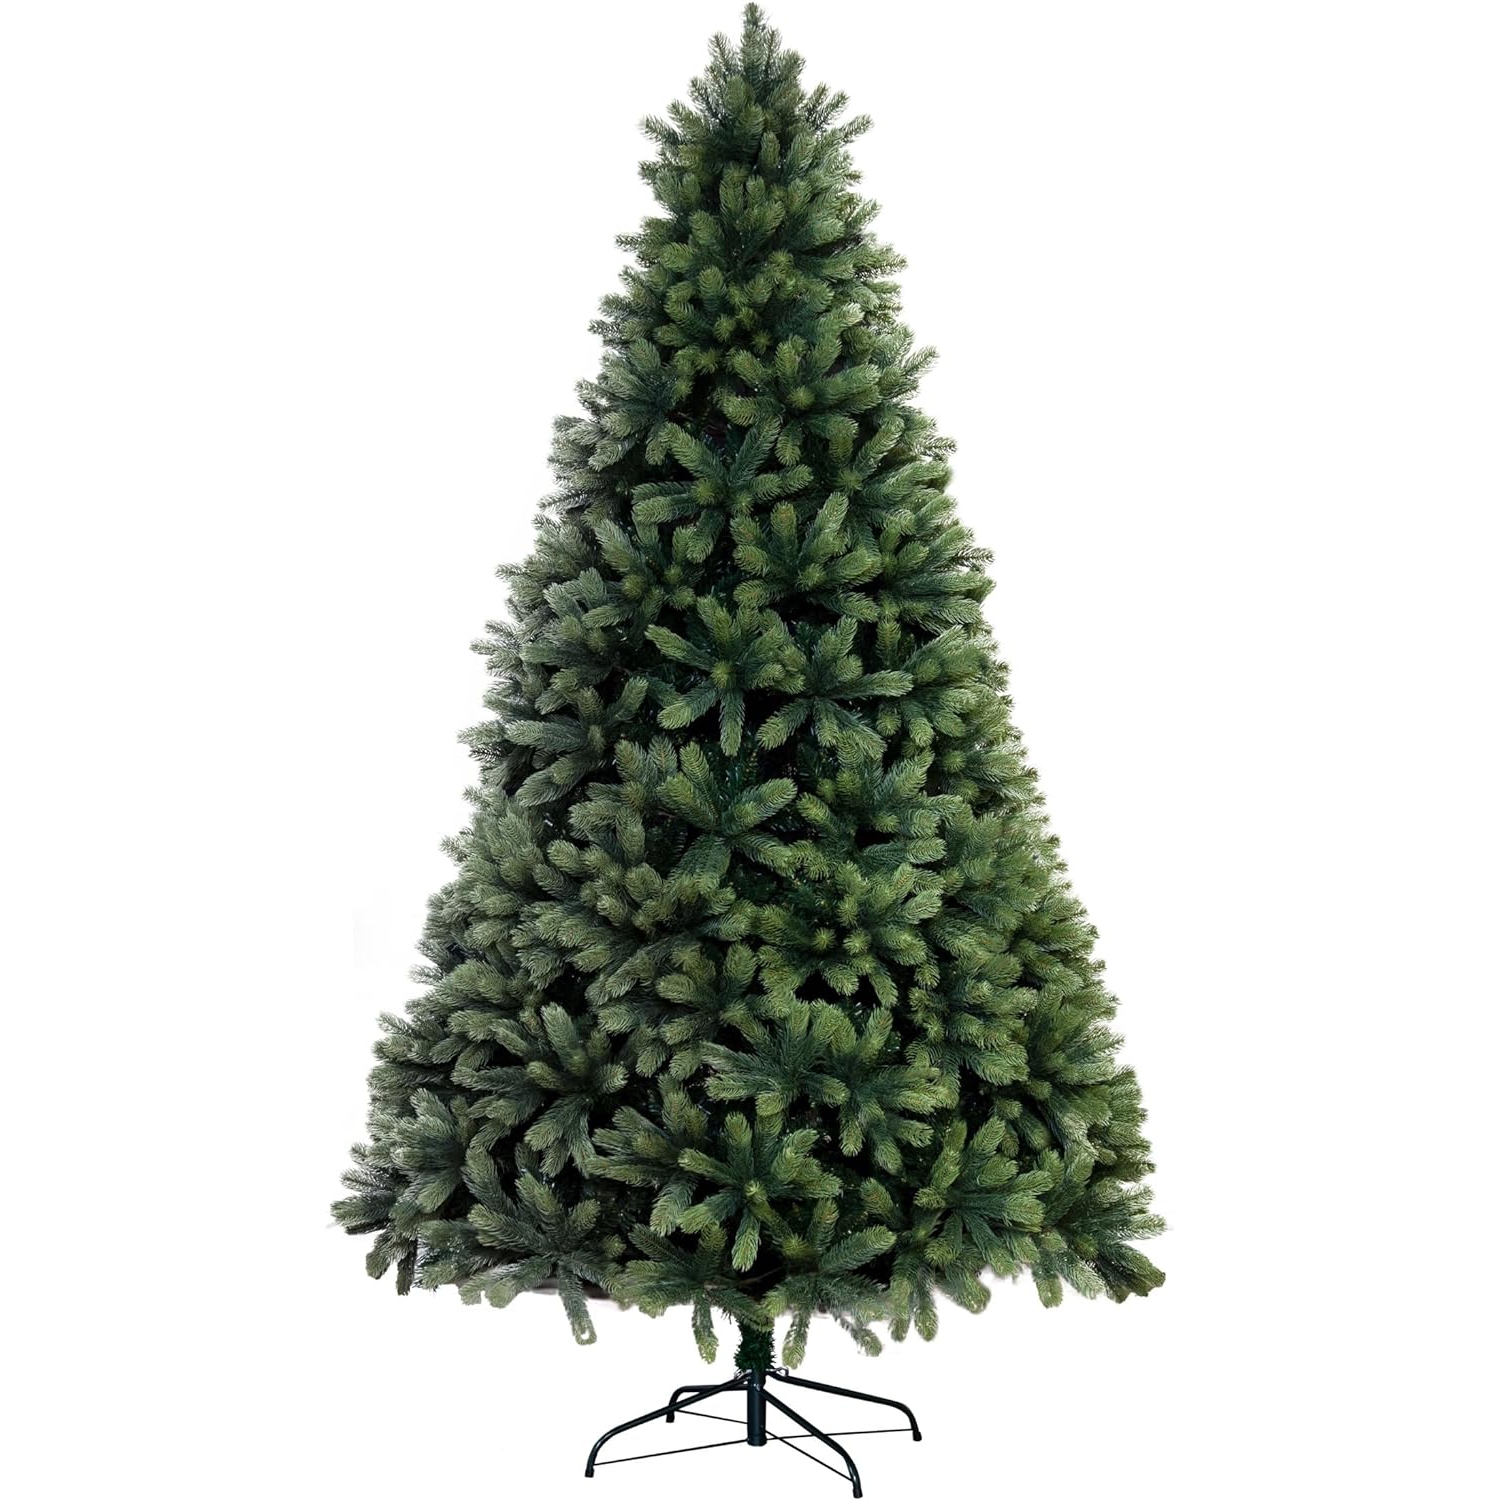 5FT Artificial Christmas Tree, Holiday Xmas Tree Decoration Pine Tree with 500 Branch Tips, Solid Metal Stand included